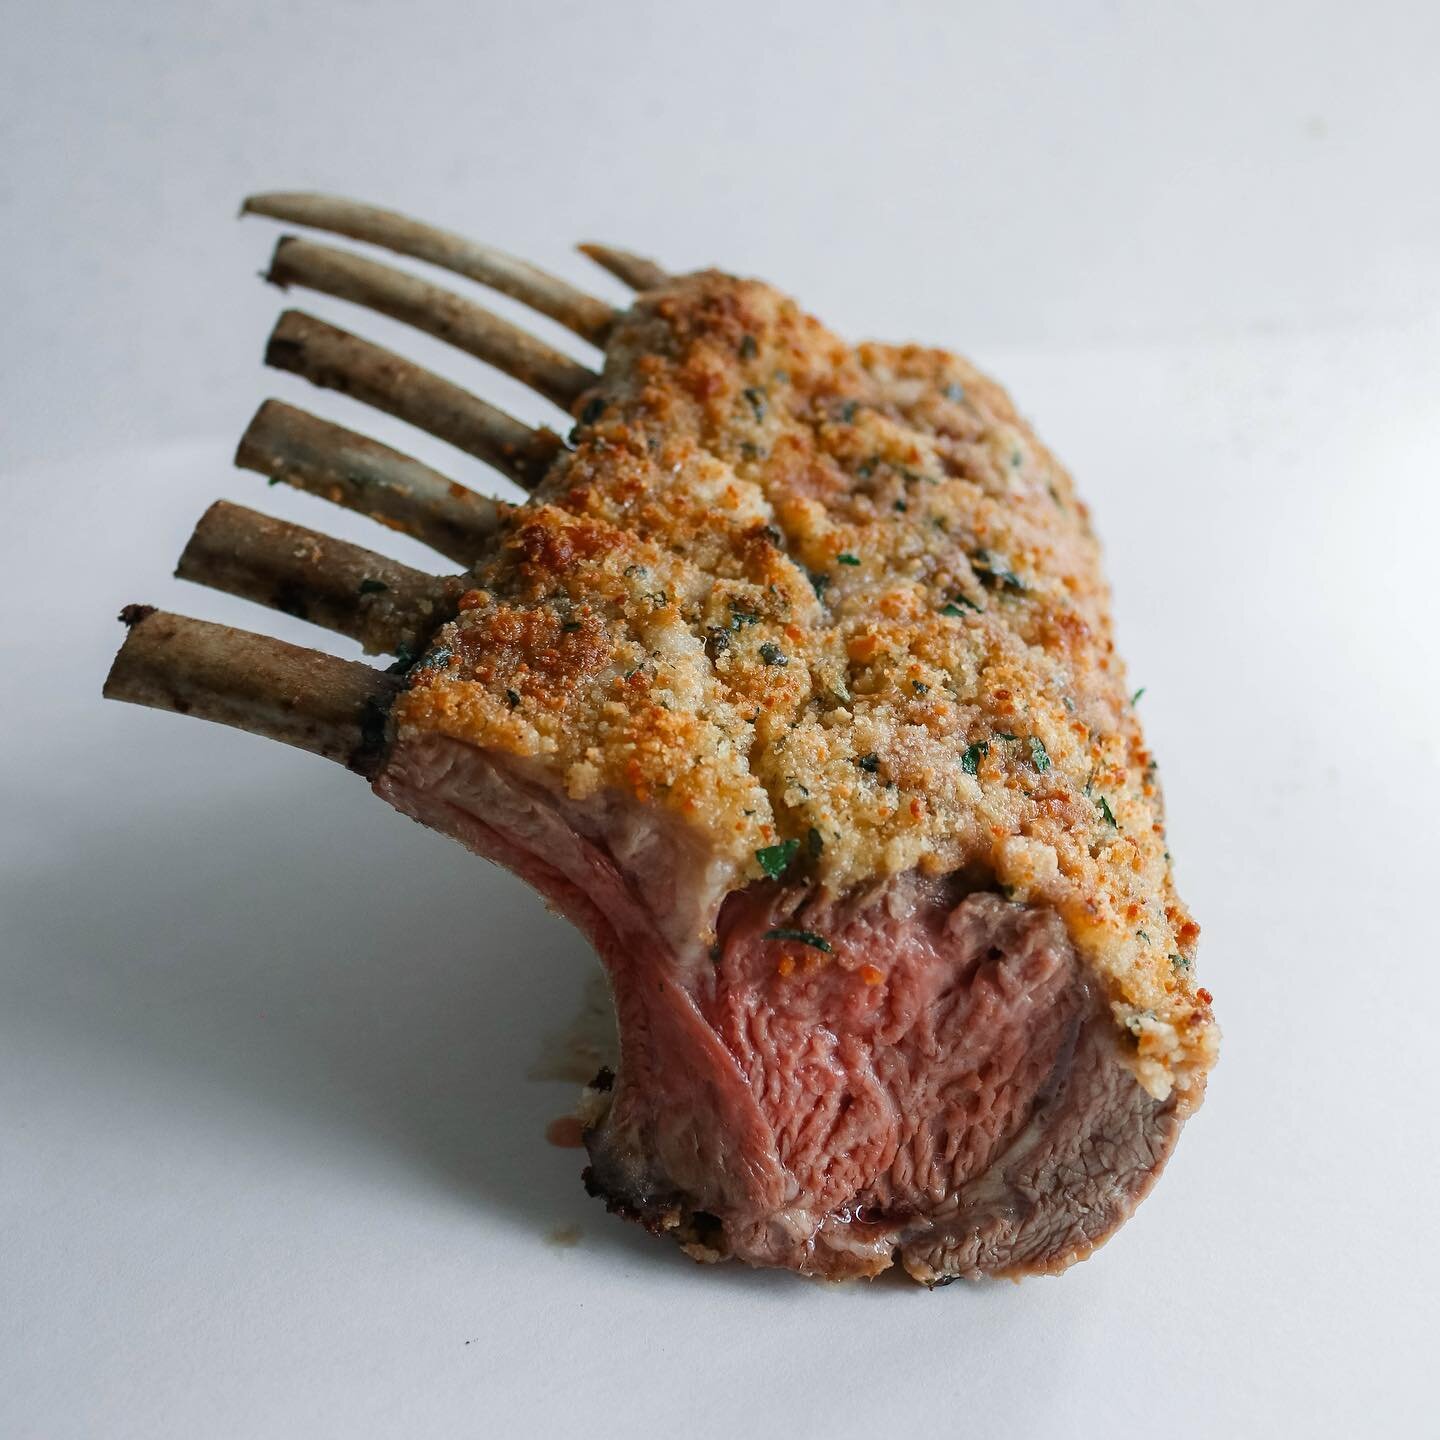 HERB CRUSTED RACK OF LAMB🤩
for a show-stopping dinner for 2-3!

I'll be uploading a step-by-step story similar to last night's new format - so come one, come all!

If I had a specialty, it would be all things lamb. It's undoubtedly my favorite thing